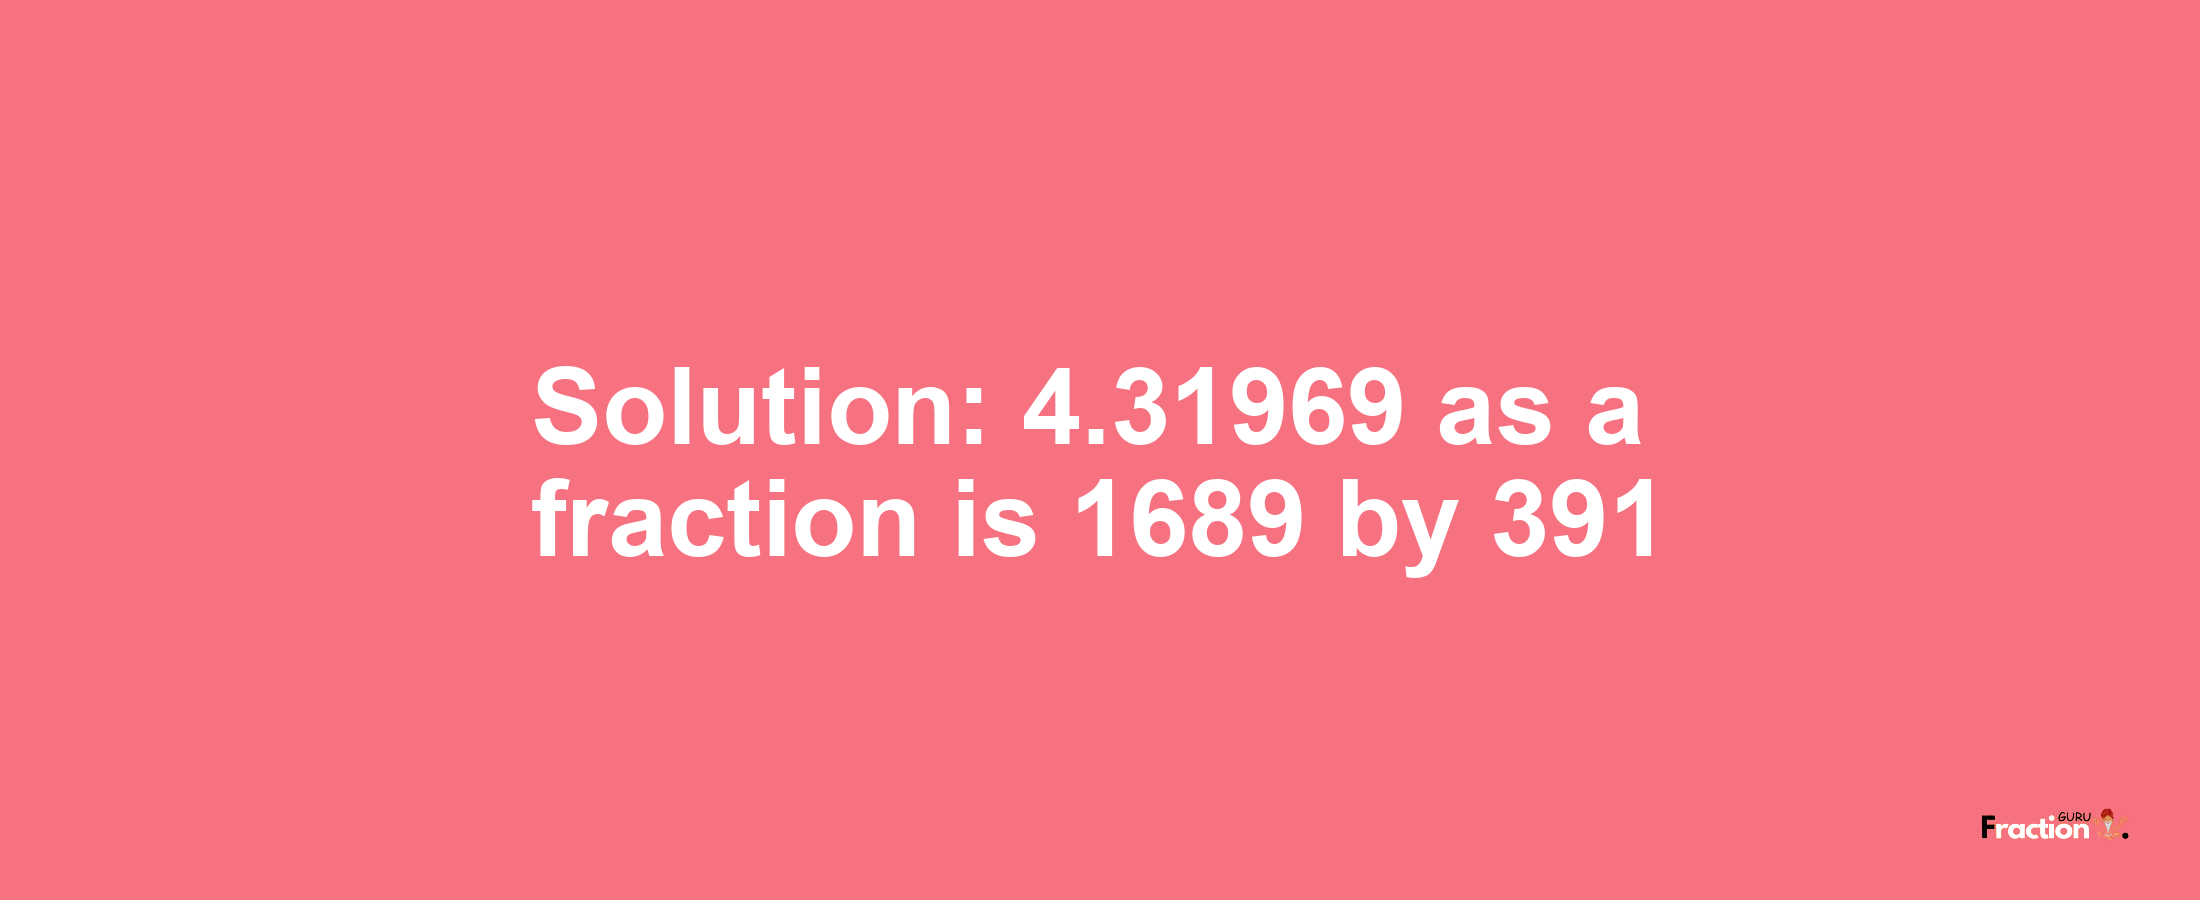 Solution:4.31969 as a fraction is 1689/391